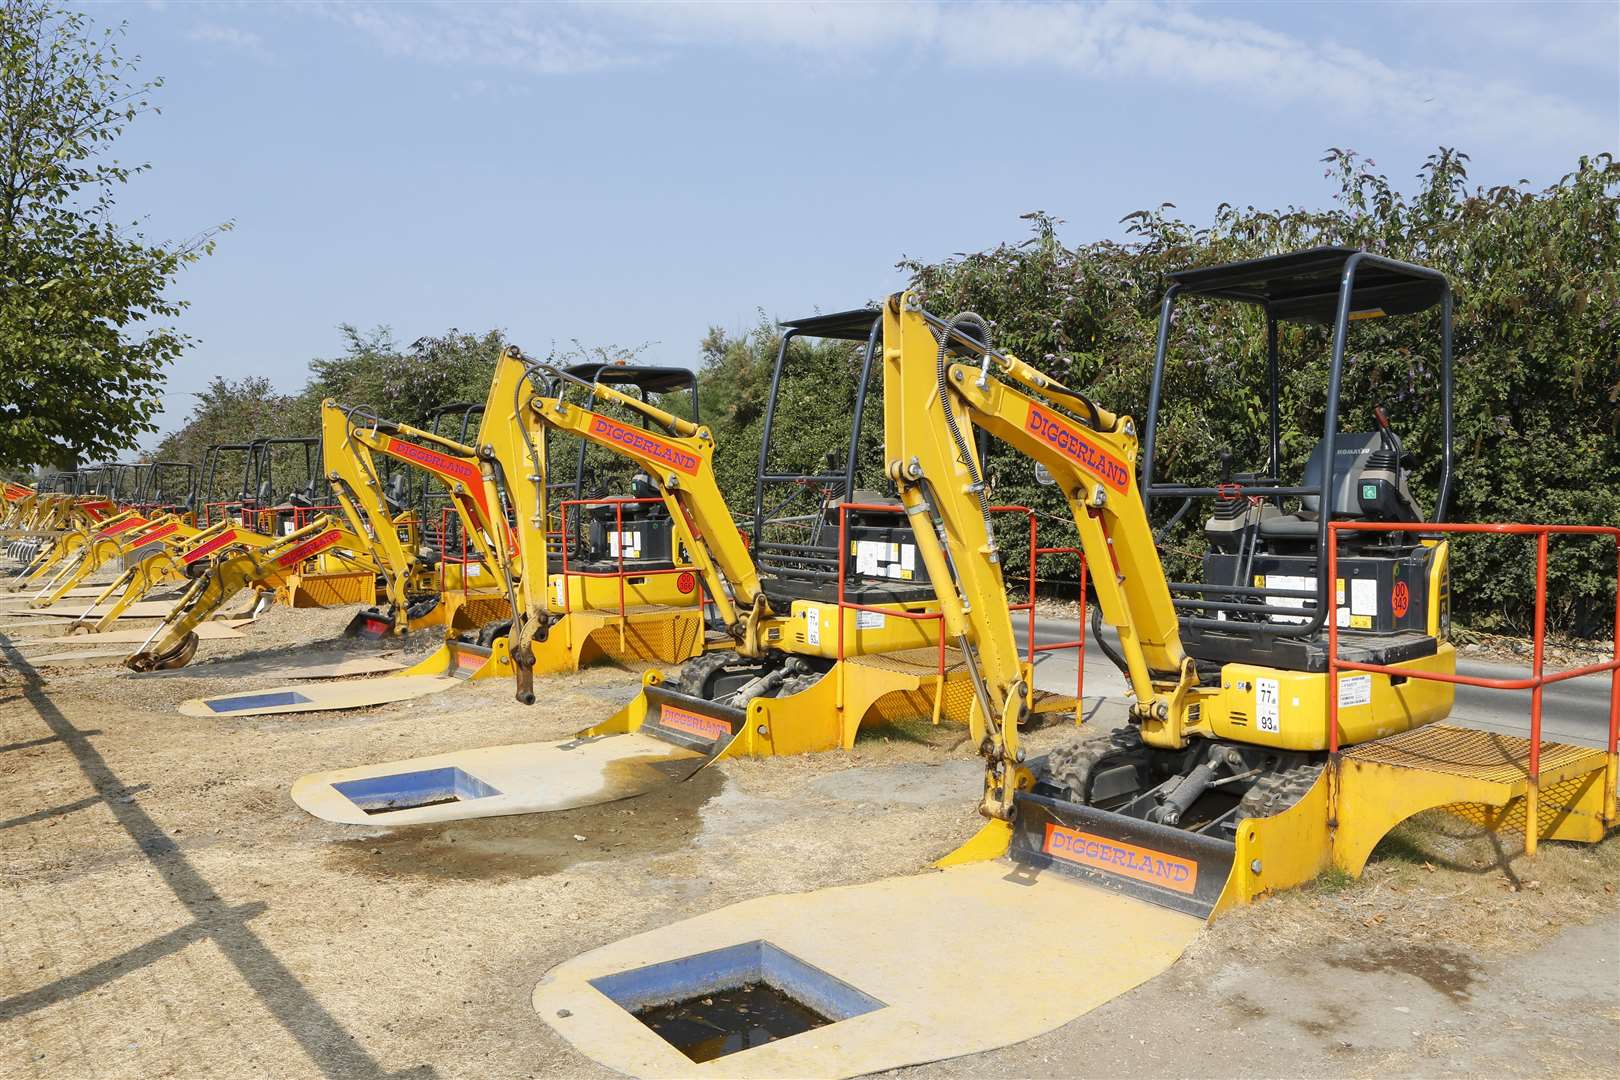 Diggerland in Rochester is open and asks families to prebook their visit